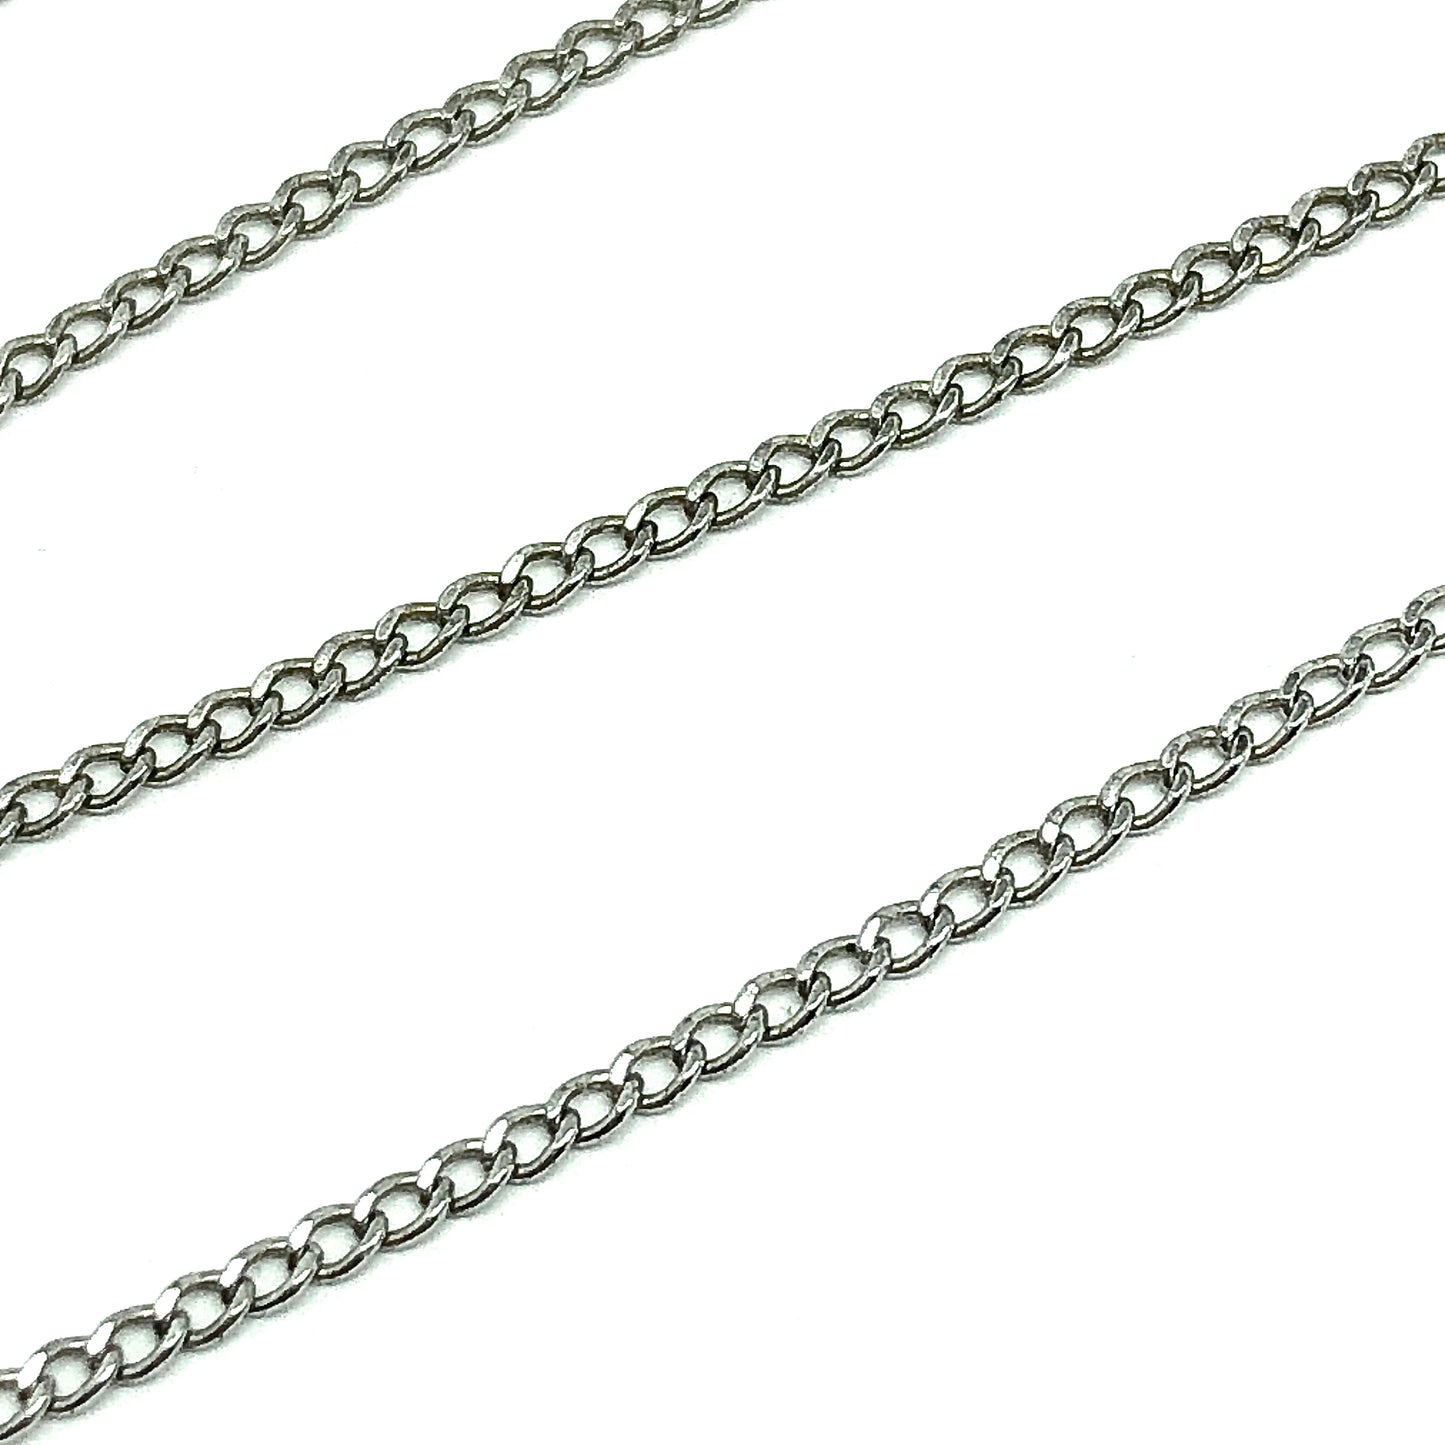 Vintage 1960s Solid Sterling Silver Feminine Fine Curb Chain Necklace